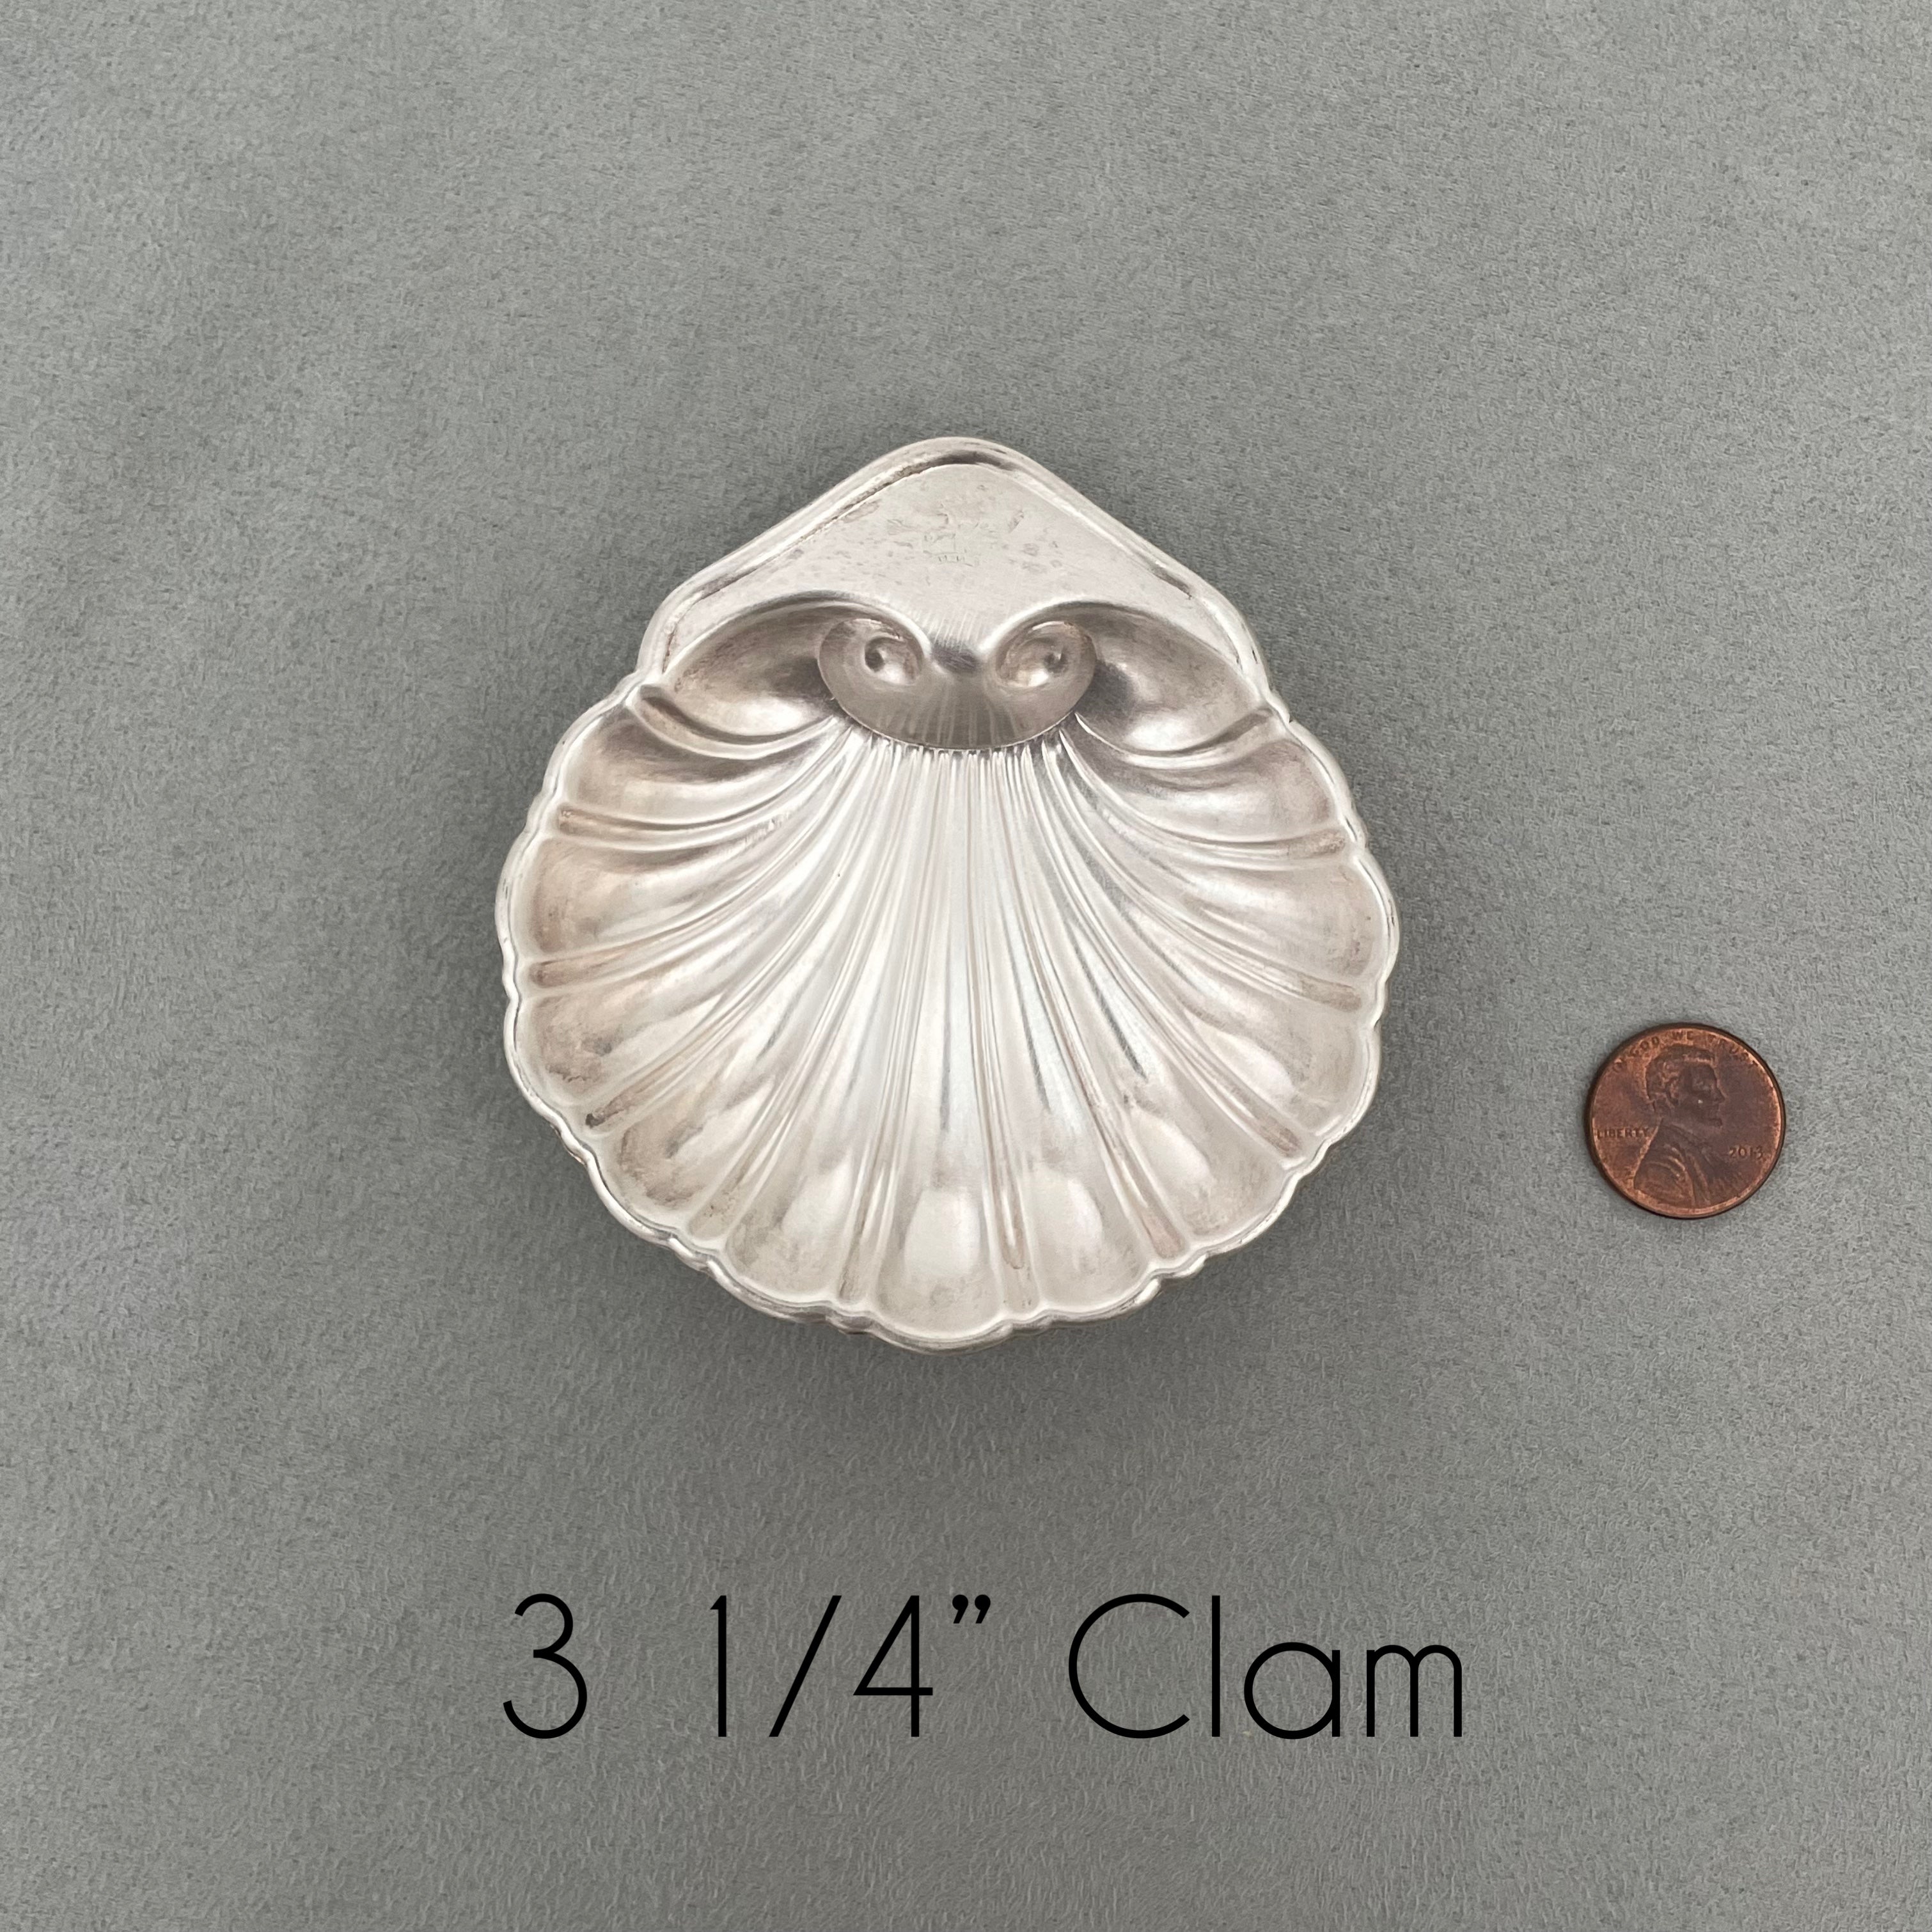 3 1/4 inch Silver clam dish with penny beside for size reference - Flat lay props from Champagne & GRIT